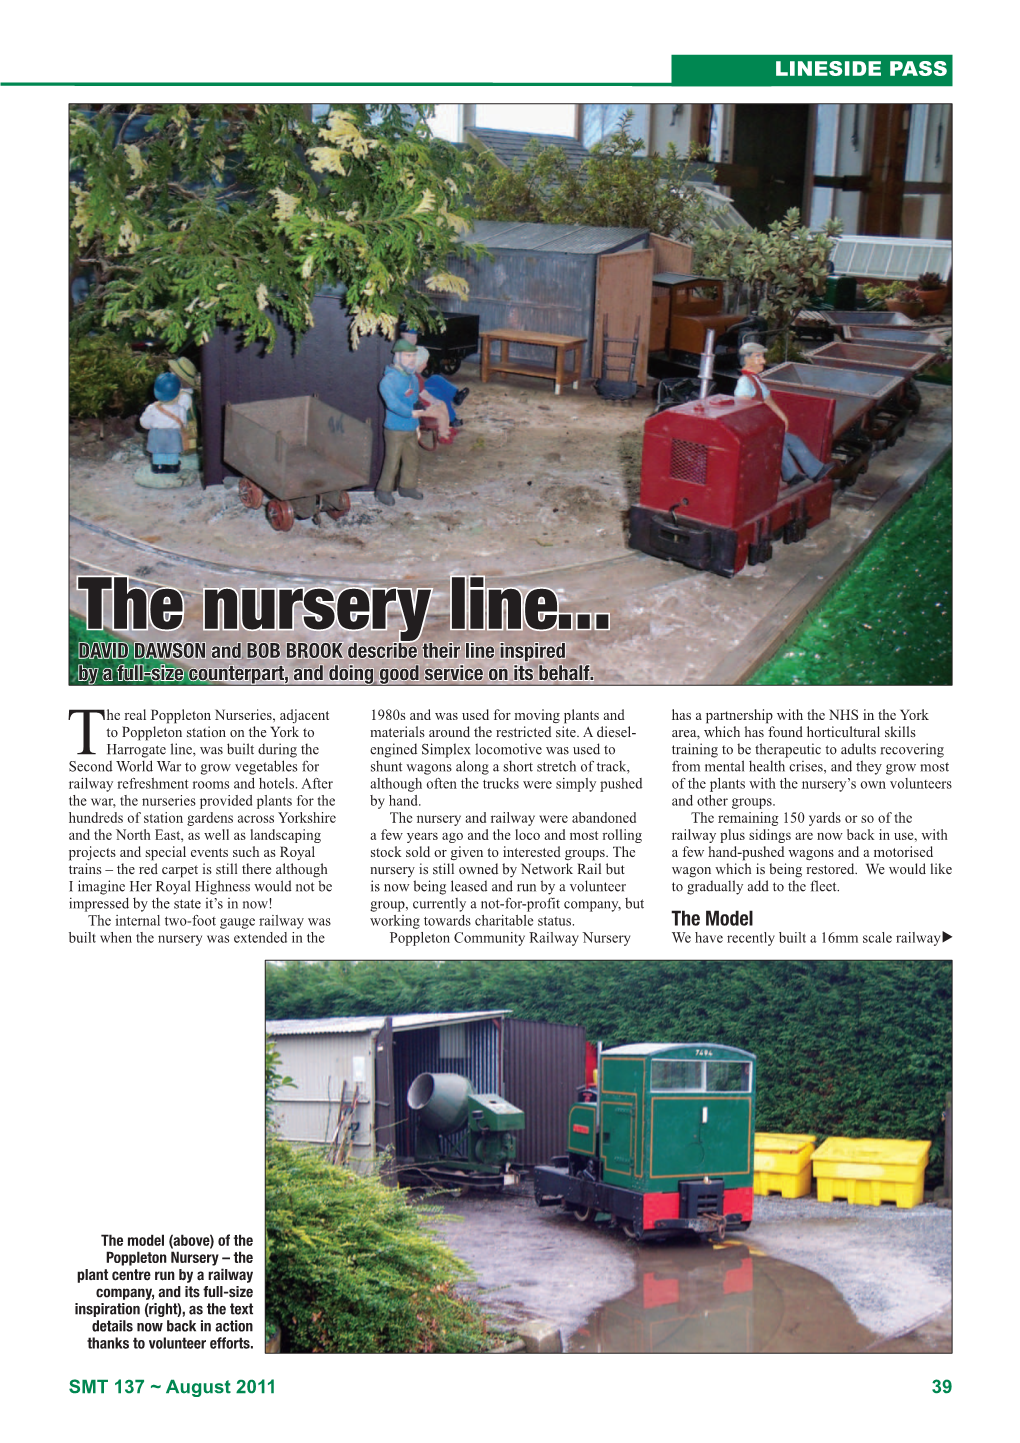 The Nursery Line... DAVID DAWSON and BOB BROOK Describe Their Line Inspired by a Full-Size Counterpart, and Doing Good Service on Its Behalf